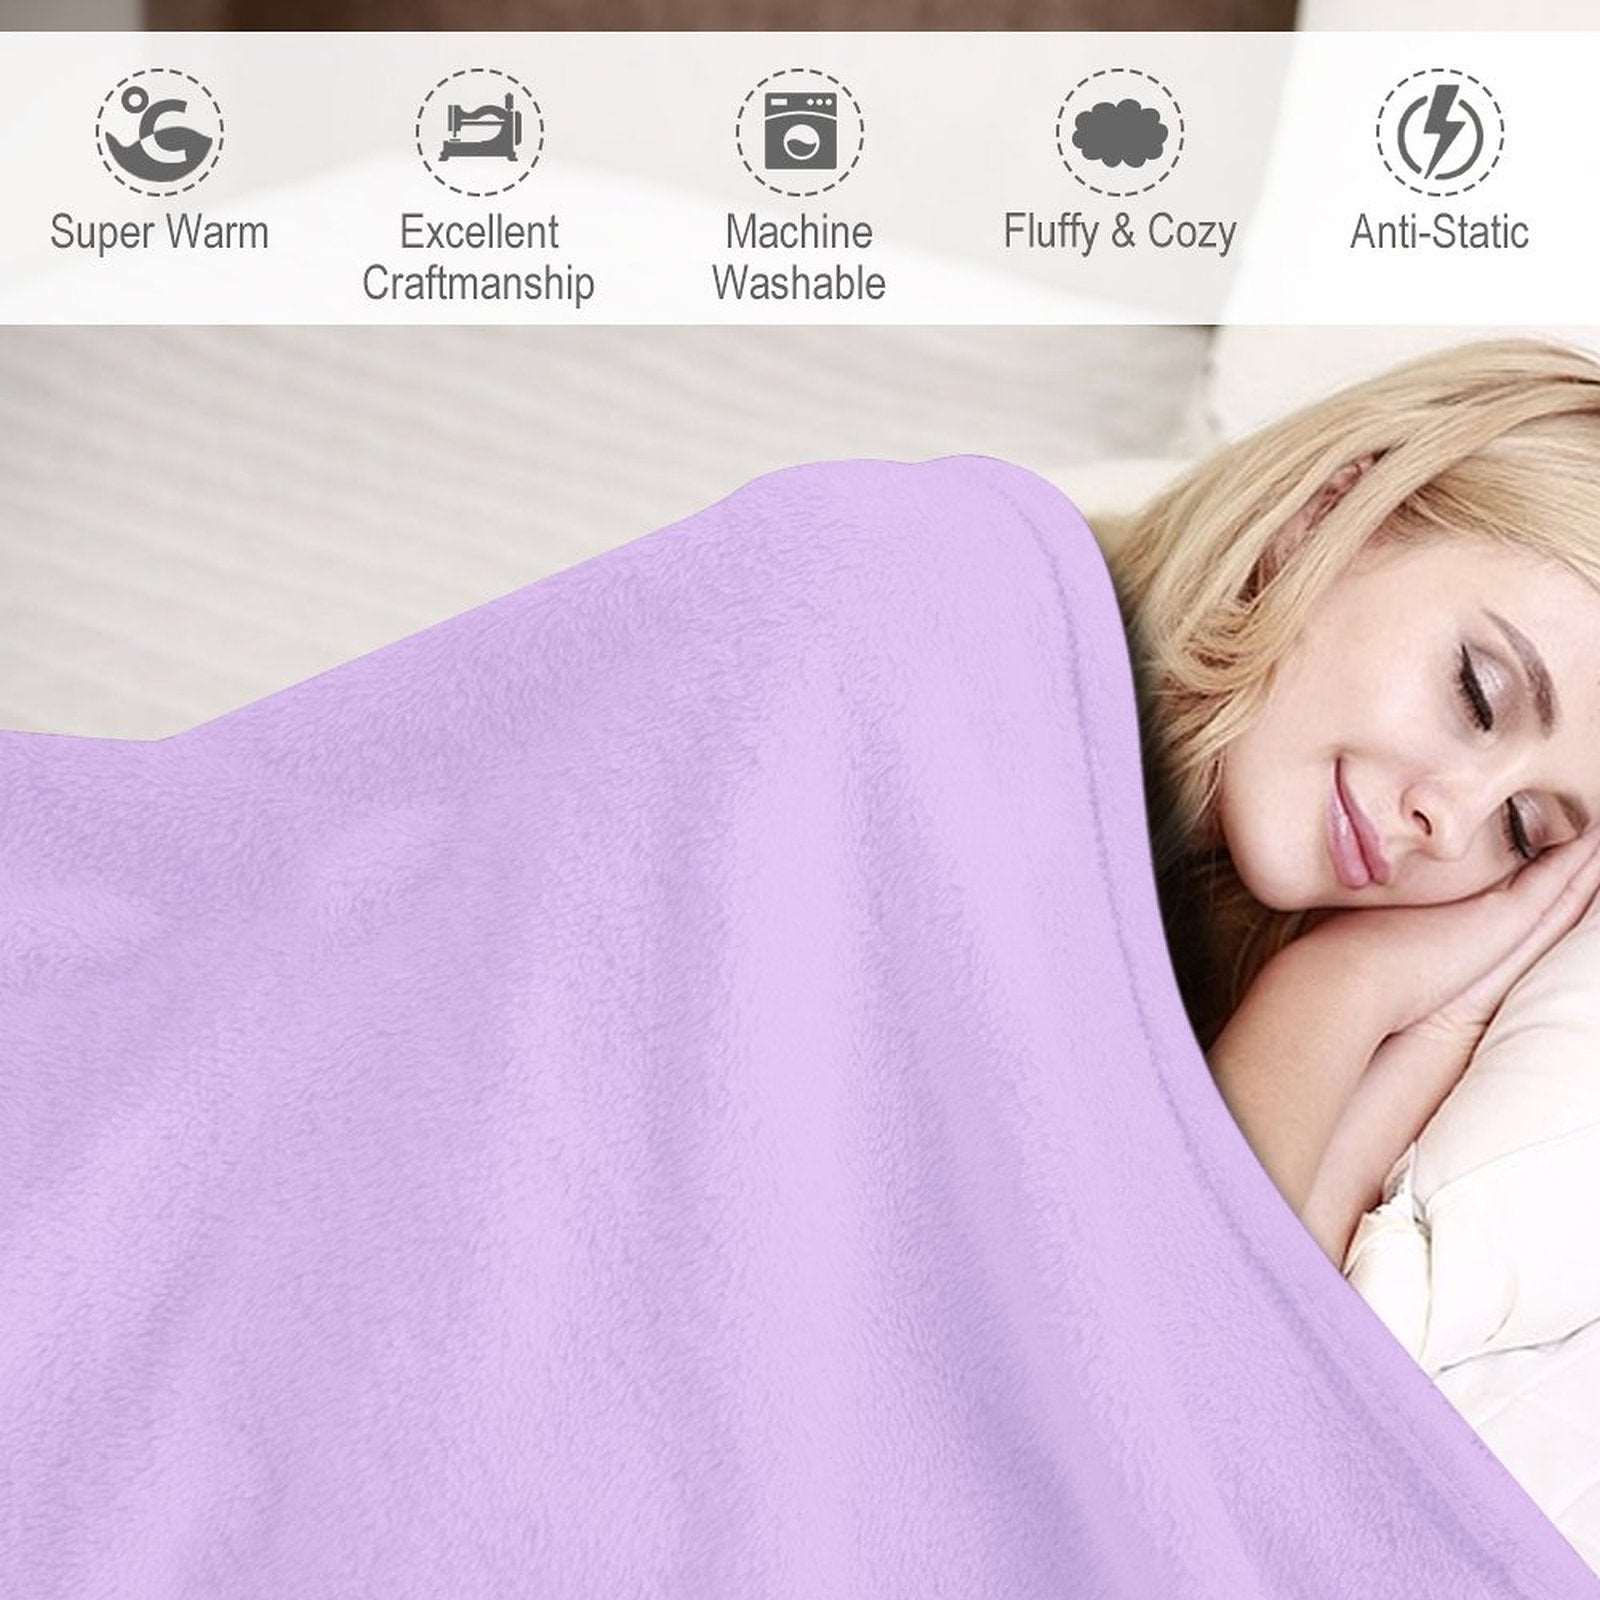 Create Your Own 280gsm Soft Flannel Fleece Blanket-Dual-sided Printing-Various Sizes